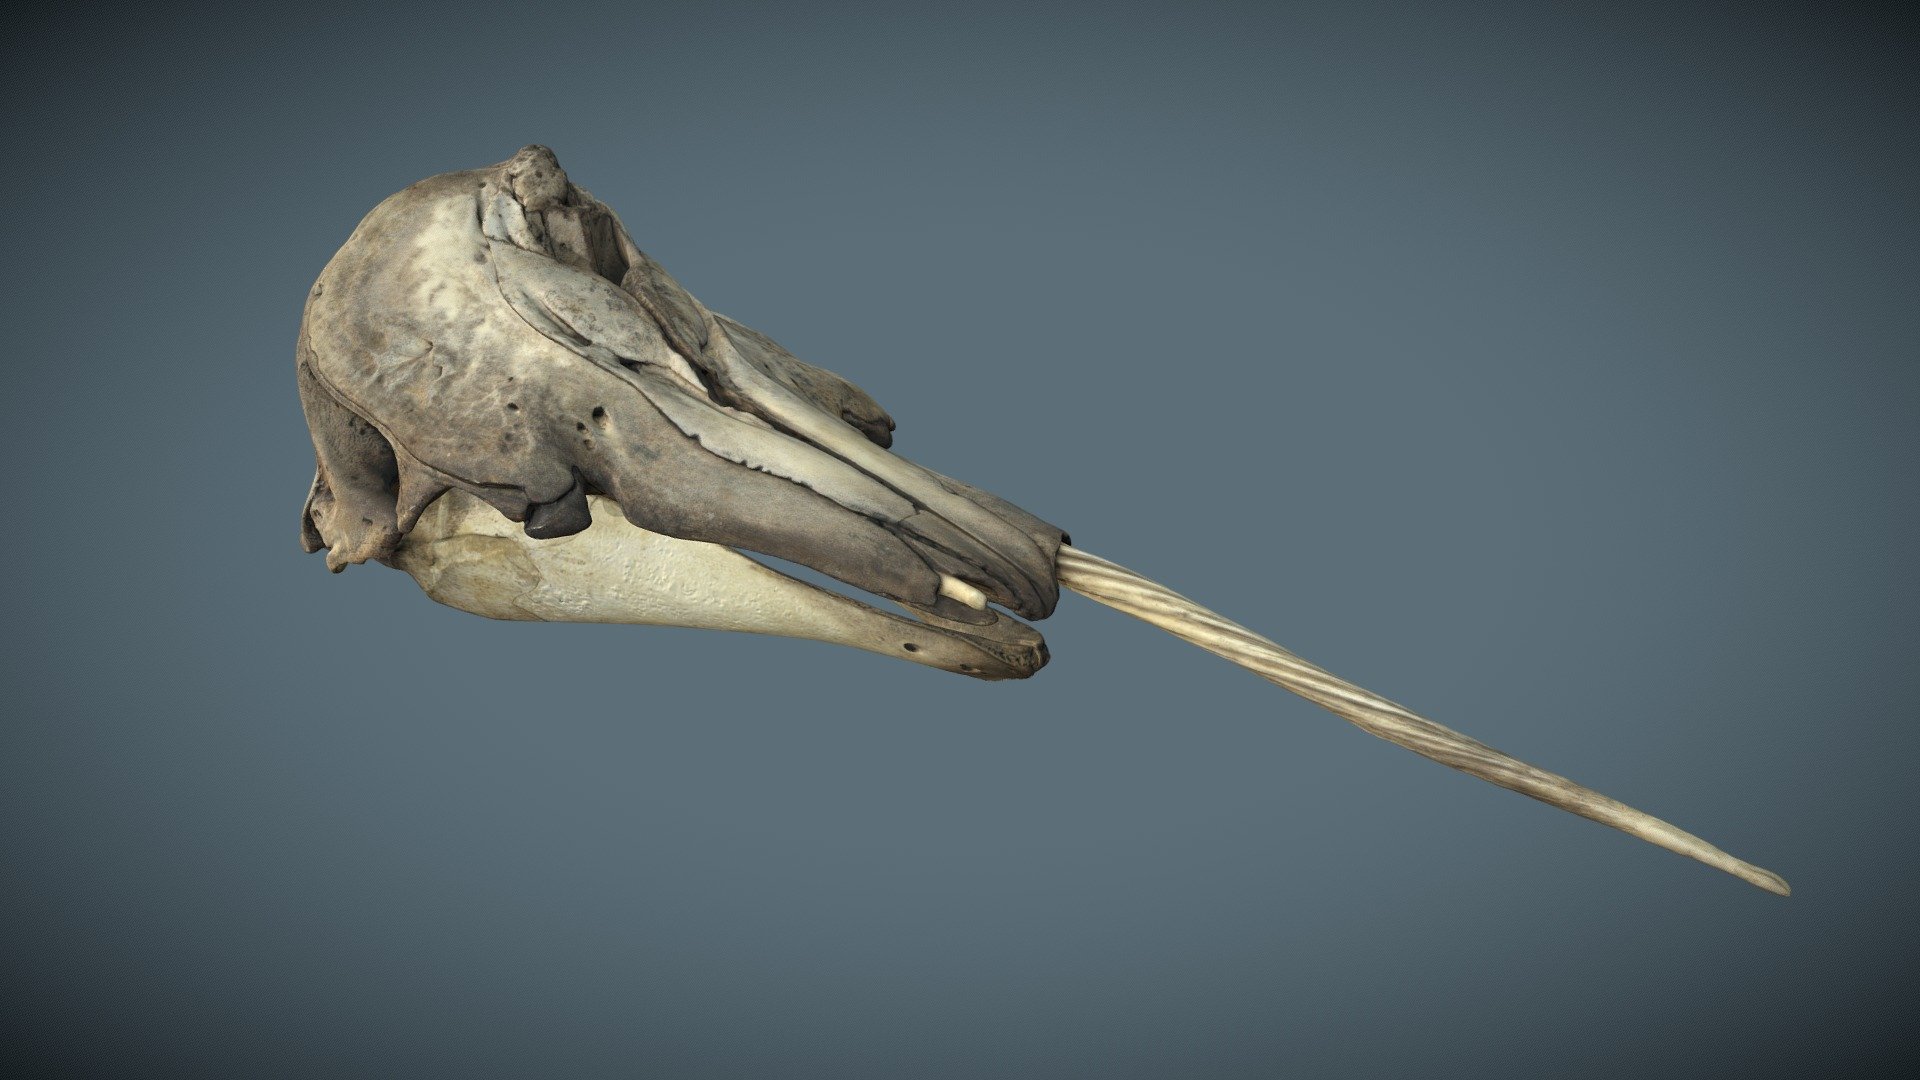 Original from Hull Maritime Museum
Phoogrammetry Scanned by S Dey, ThinkSee3D, March 2021 - Narwhal Skull & Mandible - 3D model by ThinkSee3D 3d model